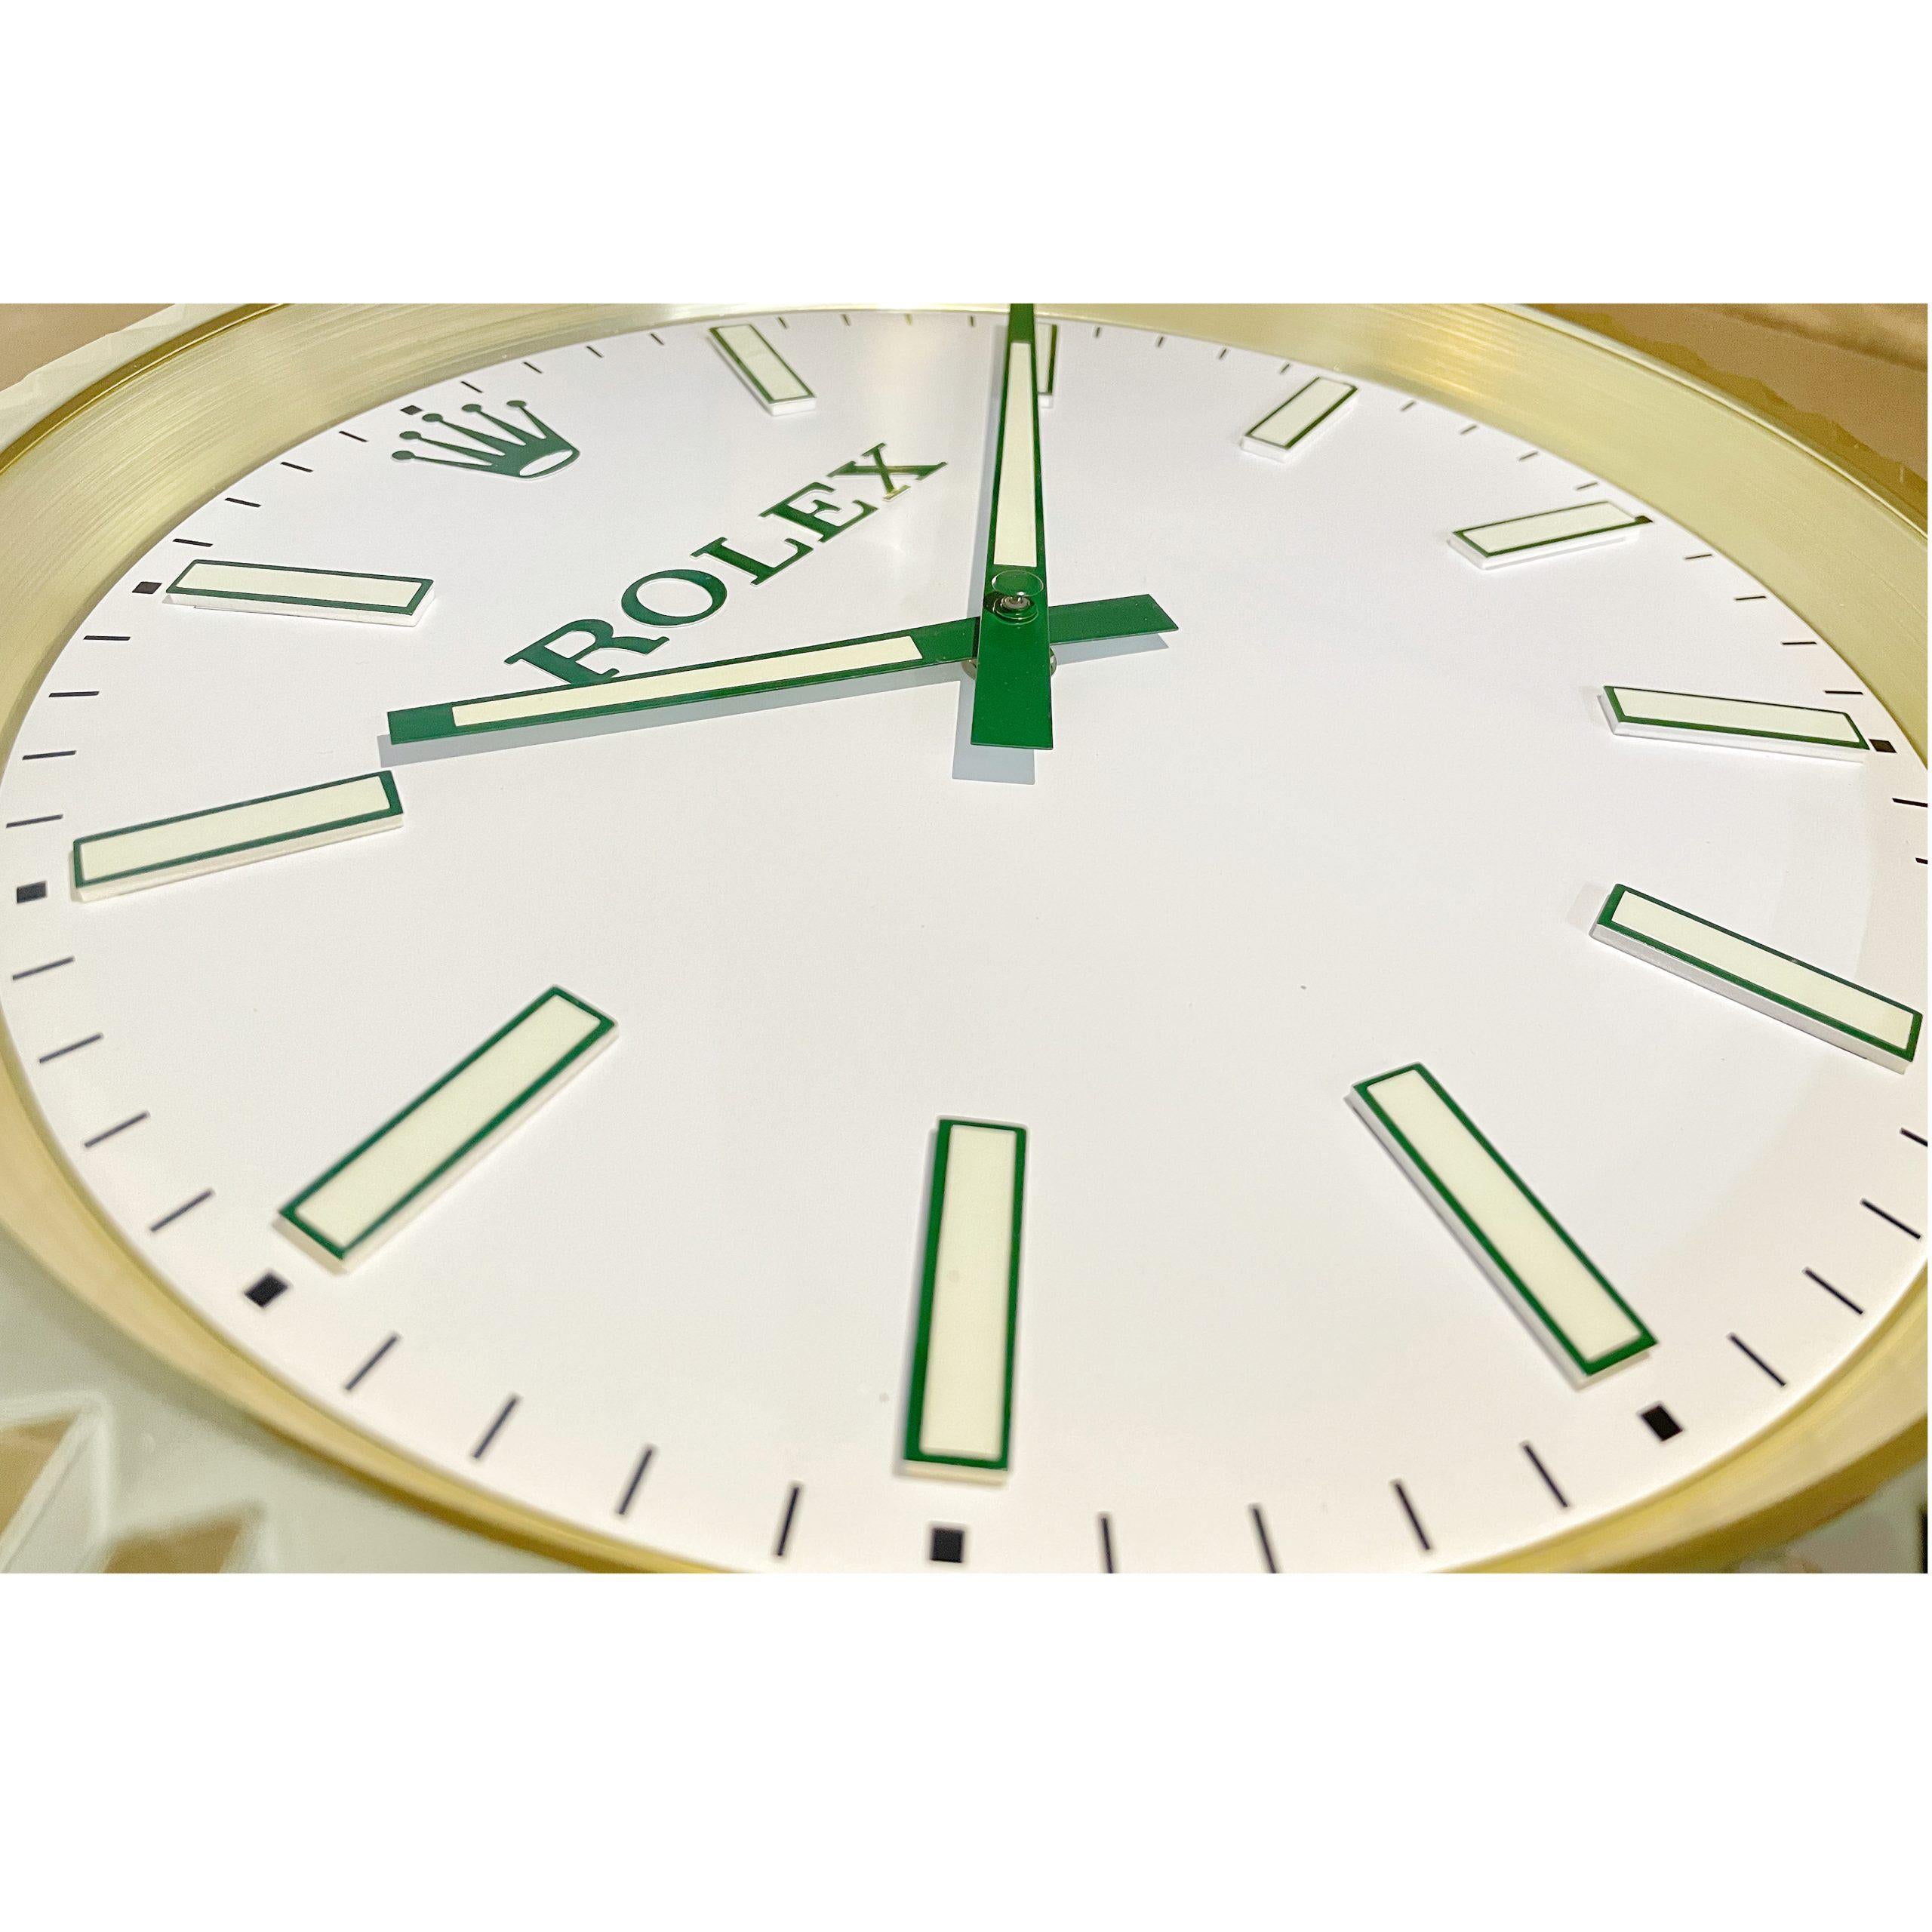 Markers with lume strips. 
Sweeping Quartz movement powered by single AA Battery. 
Clock dimensions measure approximately 34cm by 5cm / 13.5 inch by 2 inch.
Rolex wall clock
Good condition, working.
Free international shipping.